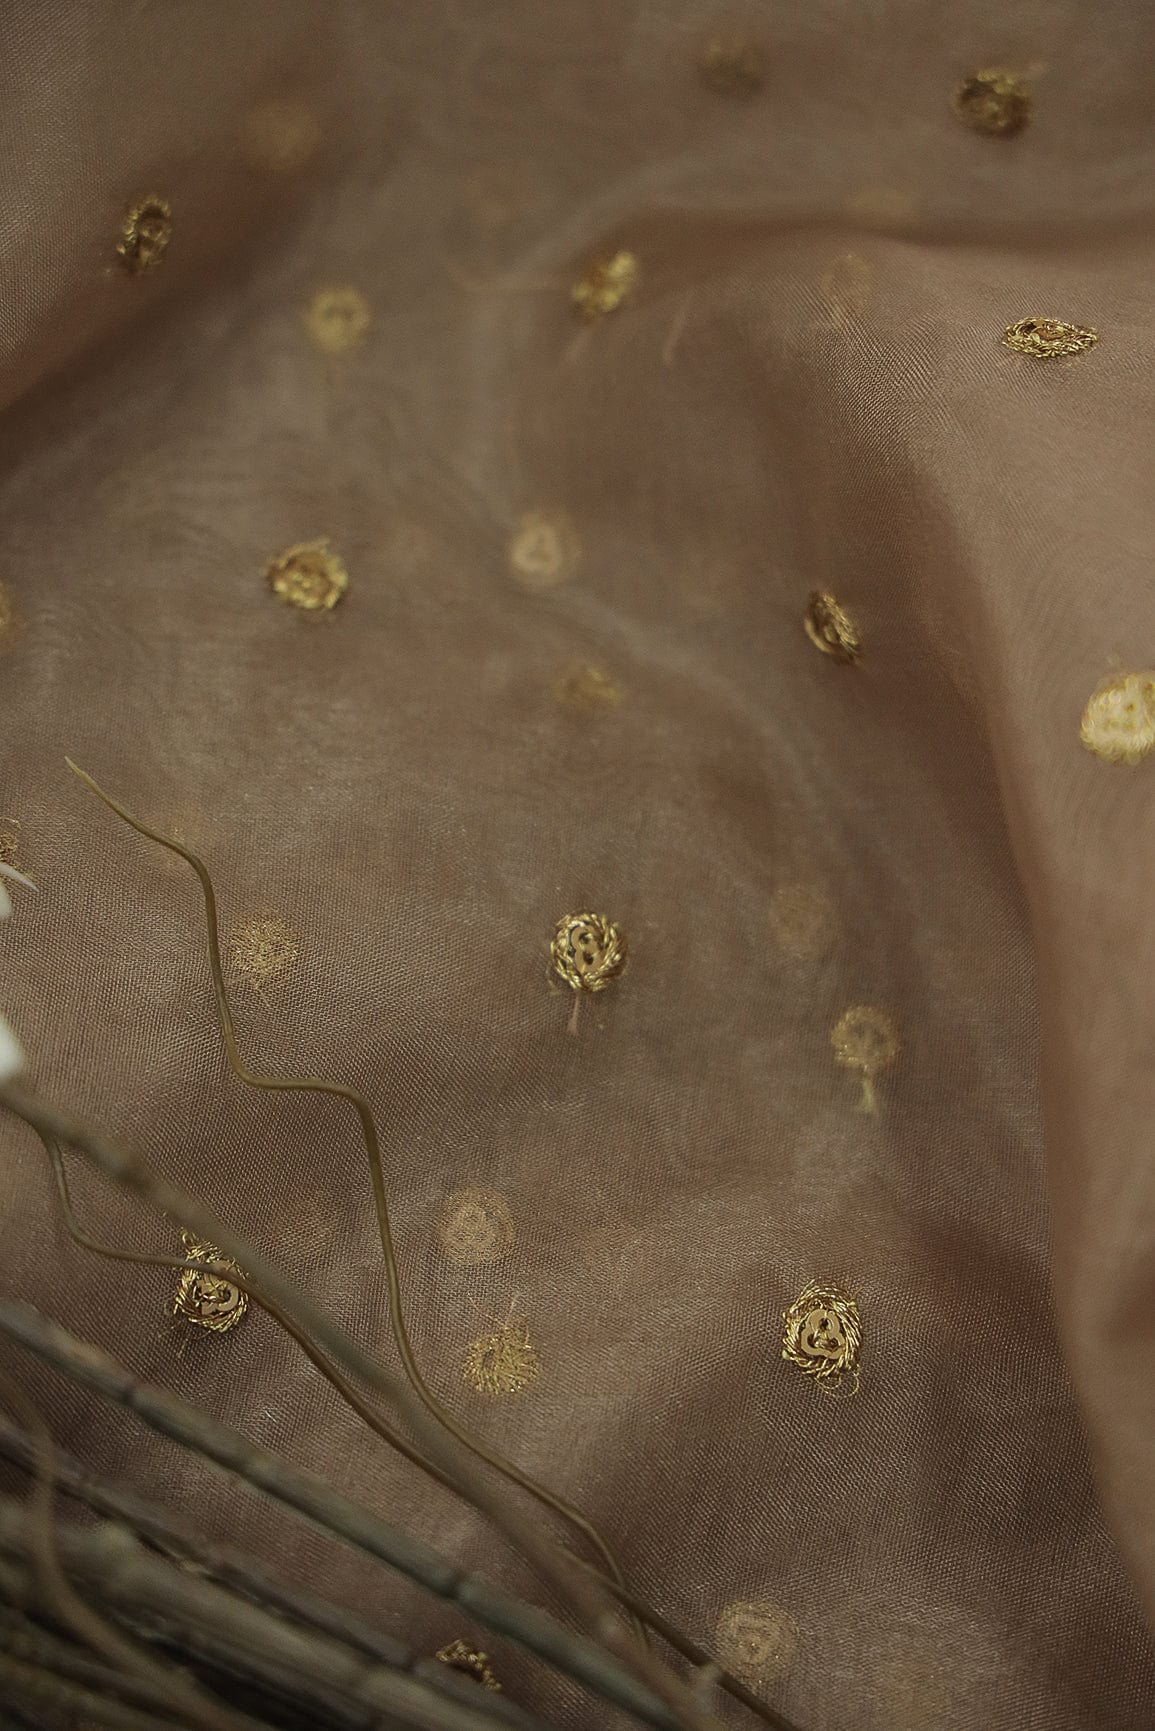 doeraa Embroidery Fabrics Gold Sequins with Gold Thread Motif Embroidery on Brown Organza Fabric